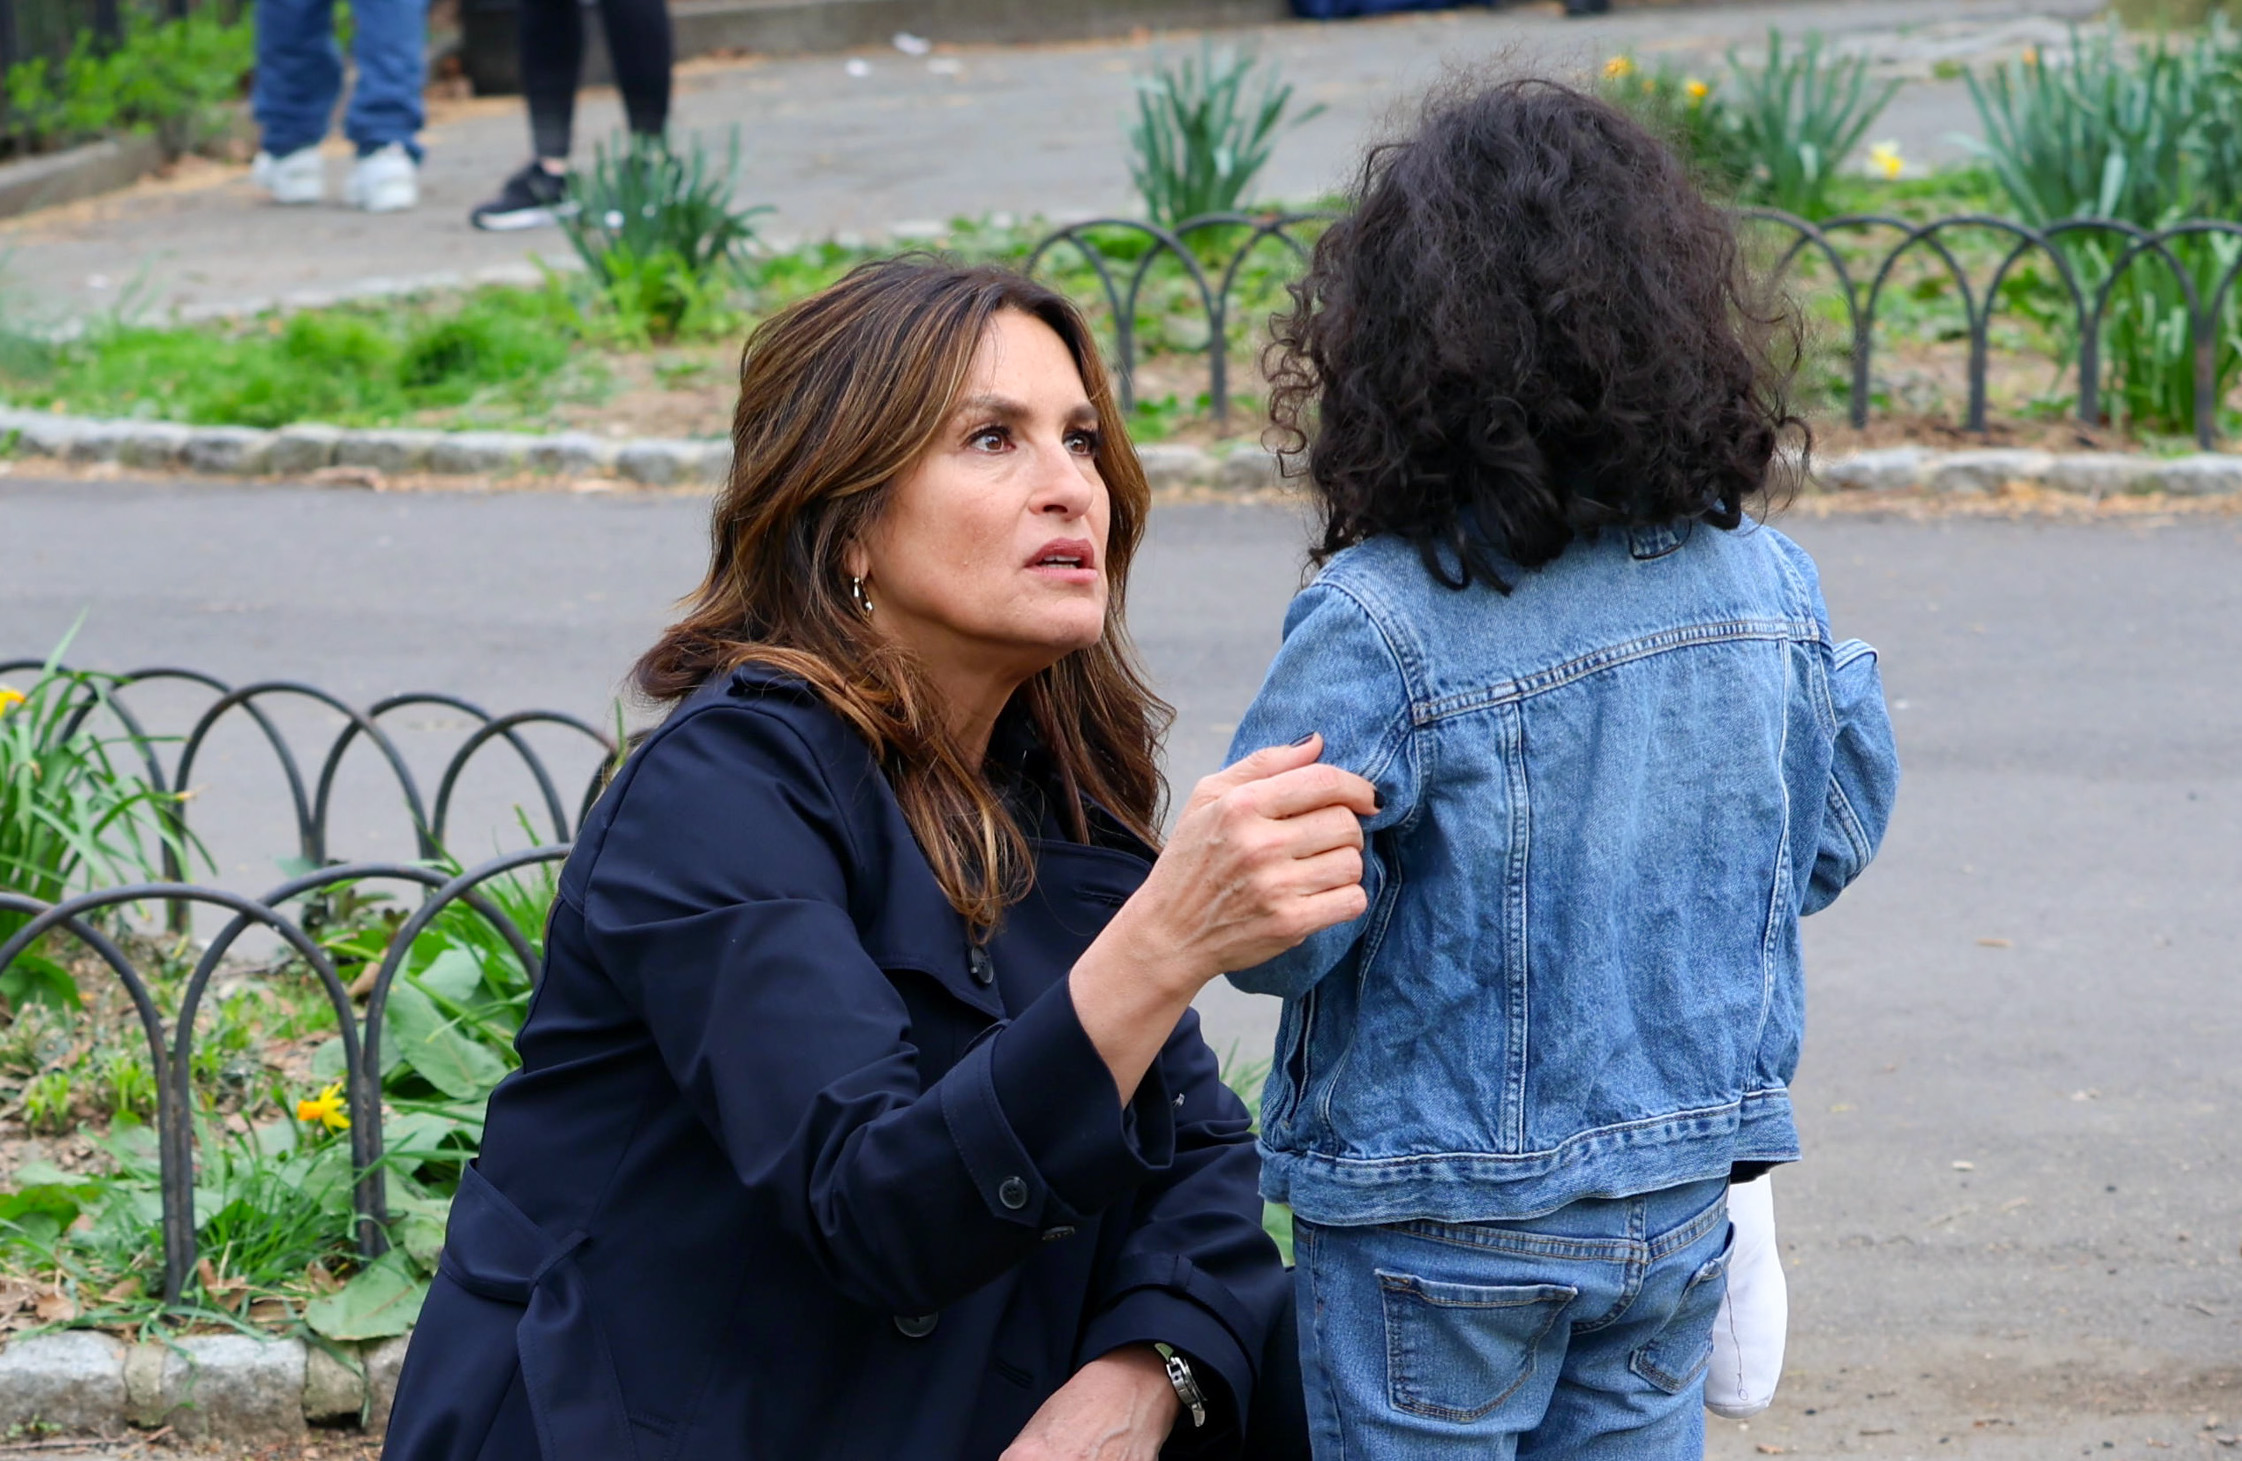 Mariska Hargitay paused ‘SVU’ filming when a lost girl mistook her for a real cop and sought assistance